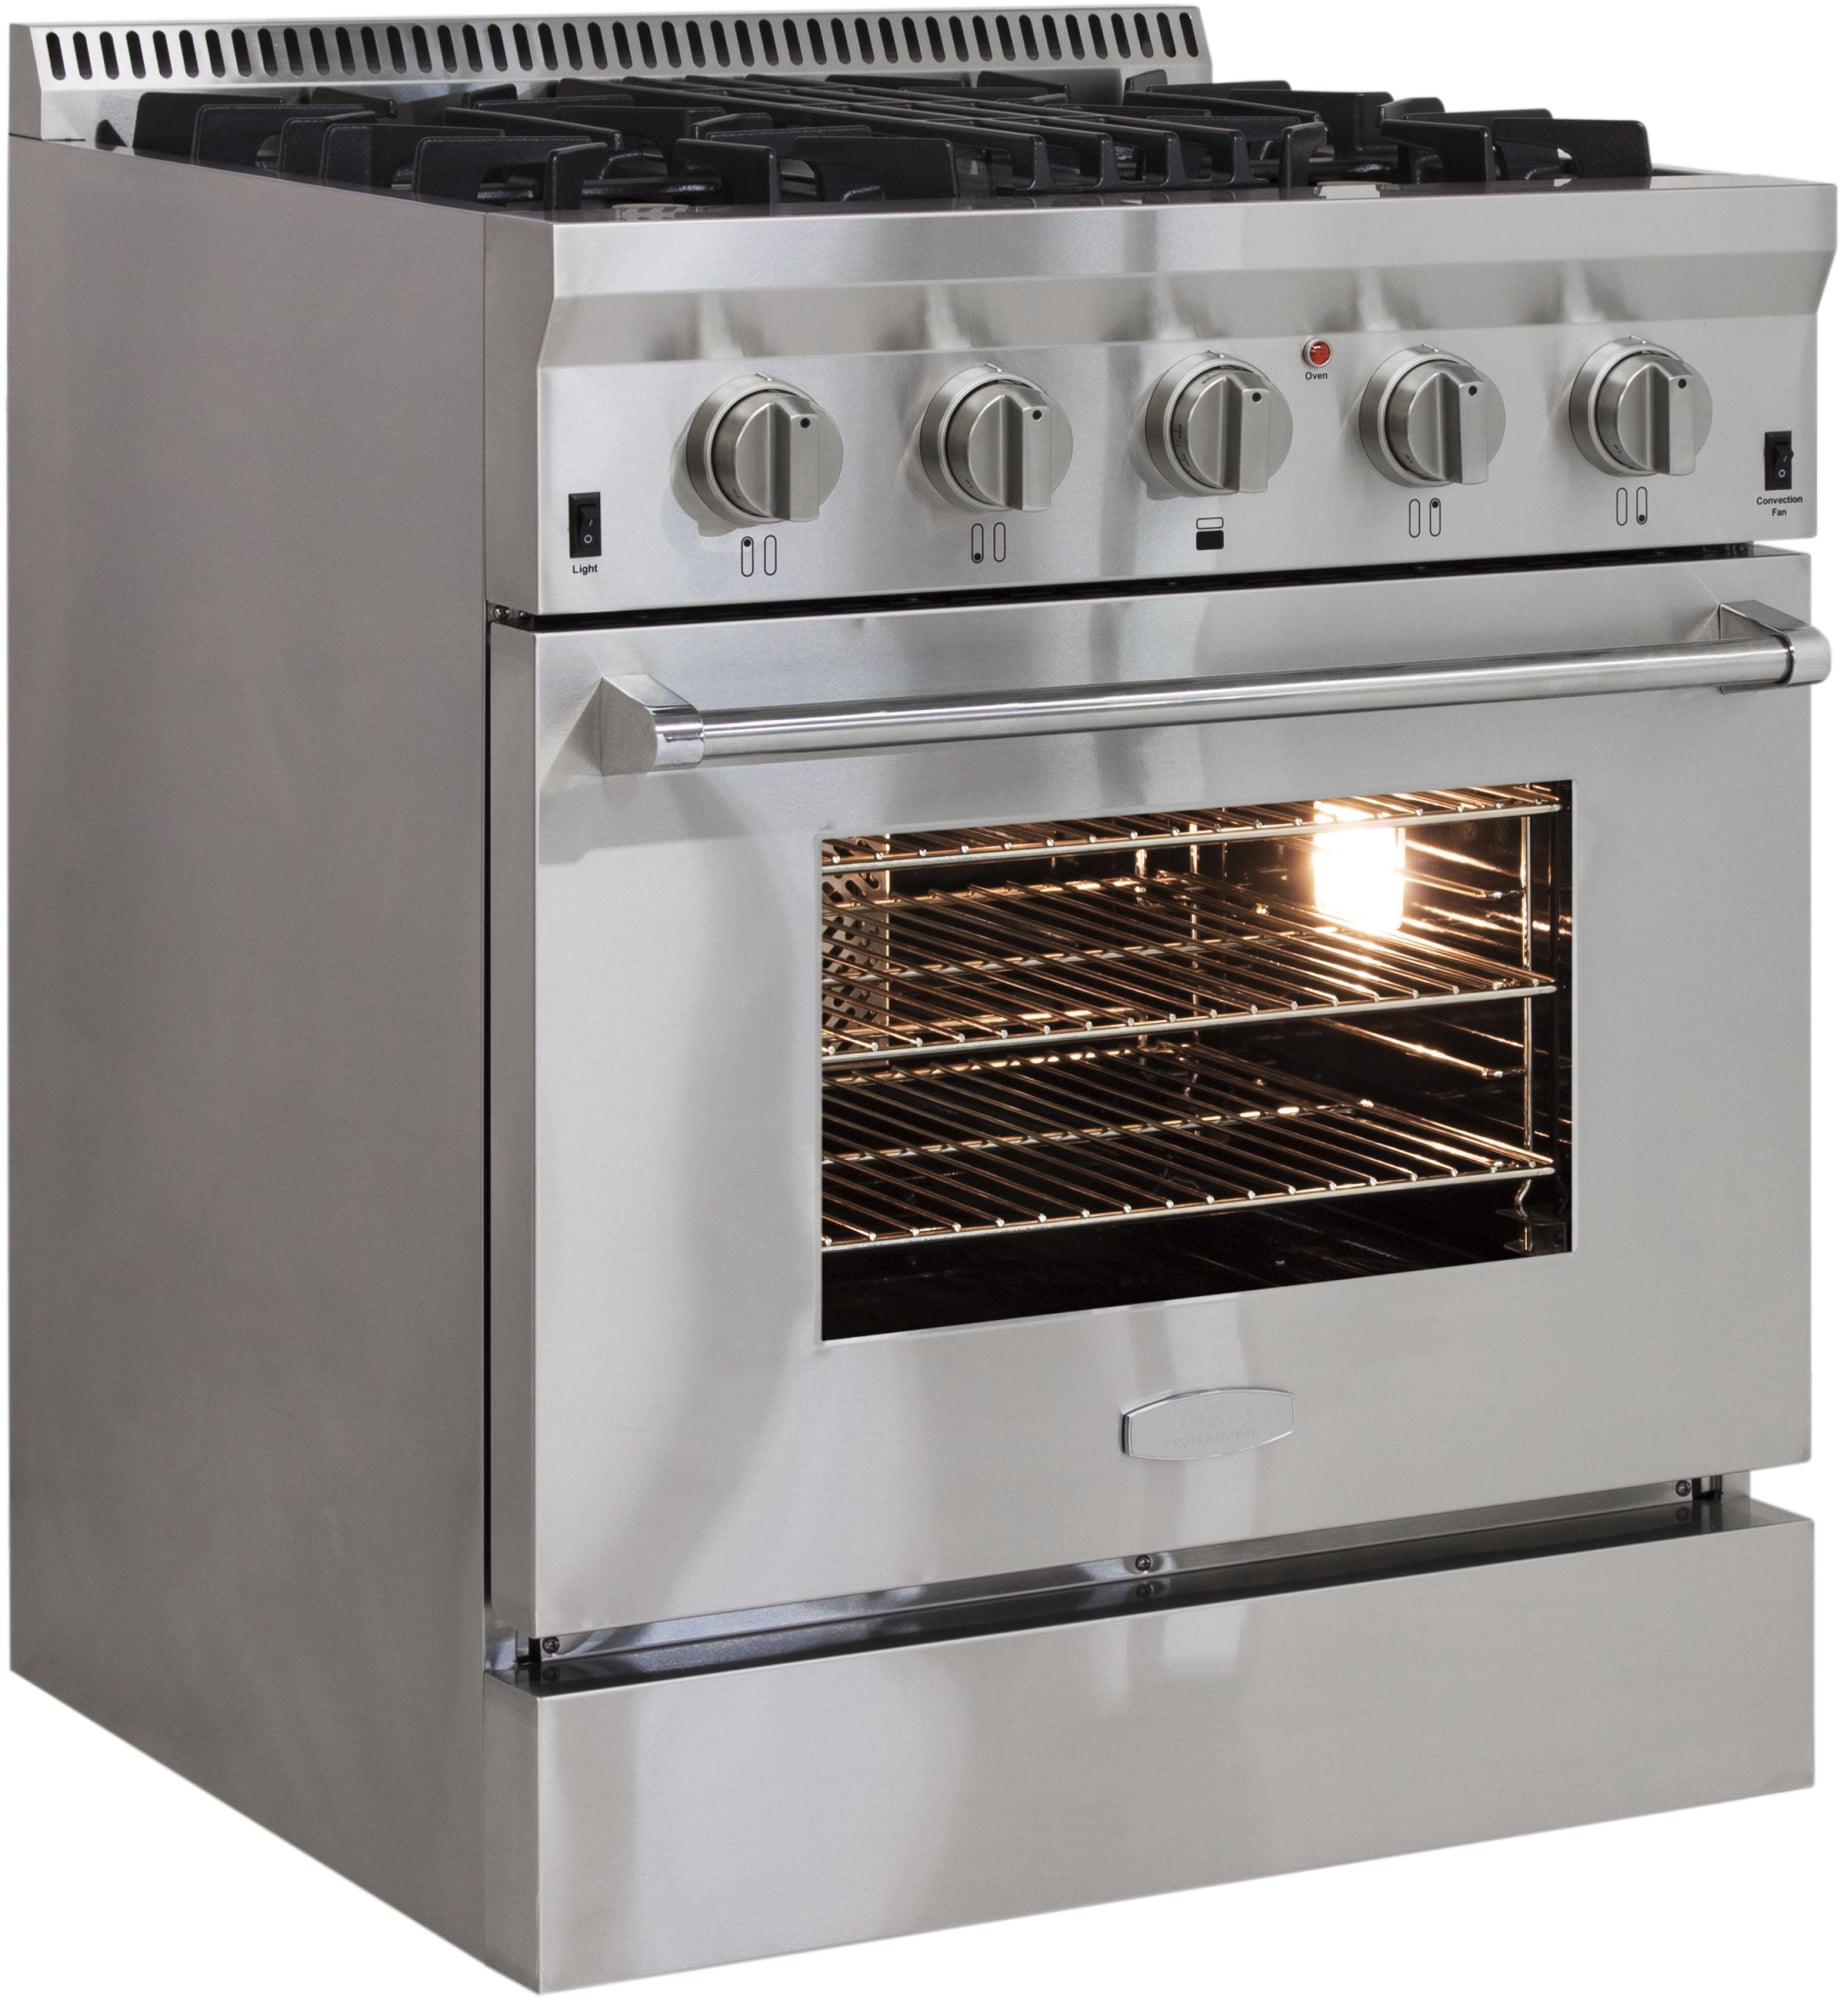 aga-apro30dfss-30-inch-freestanding-dual-fuel-range-with-4-burners-4-2